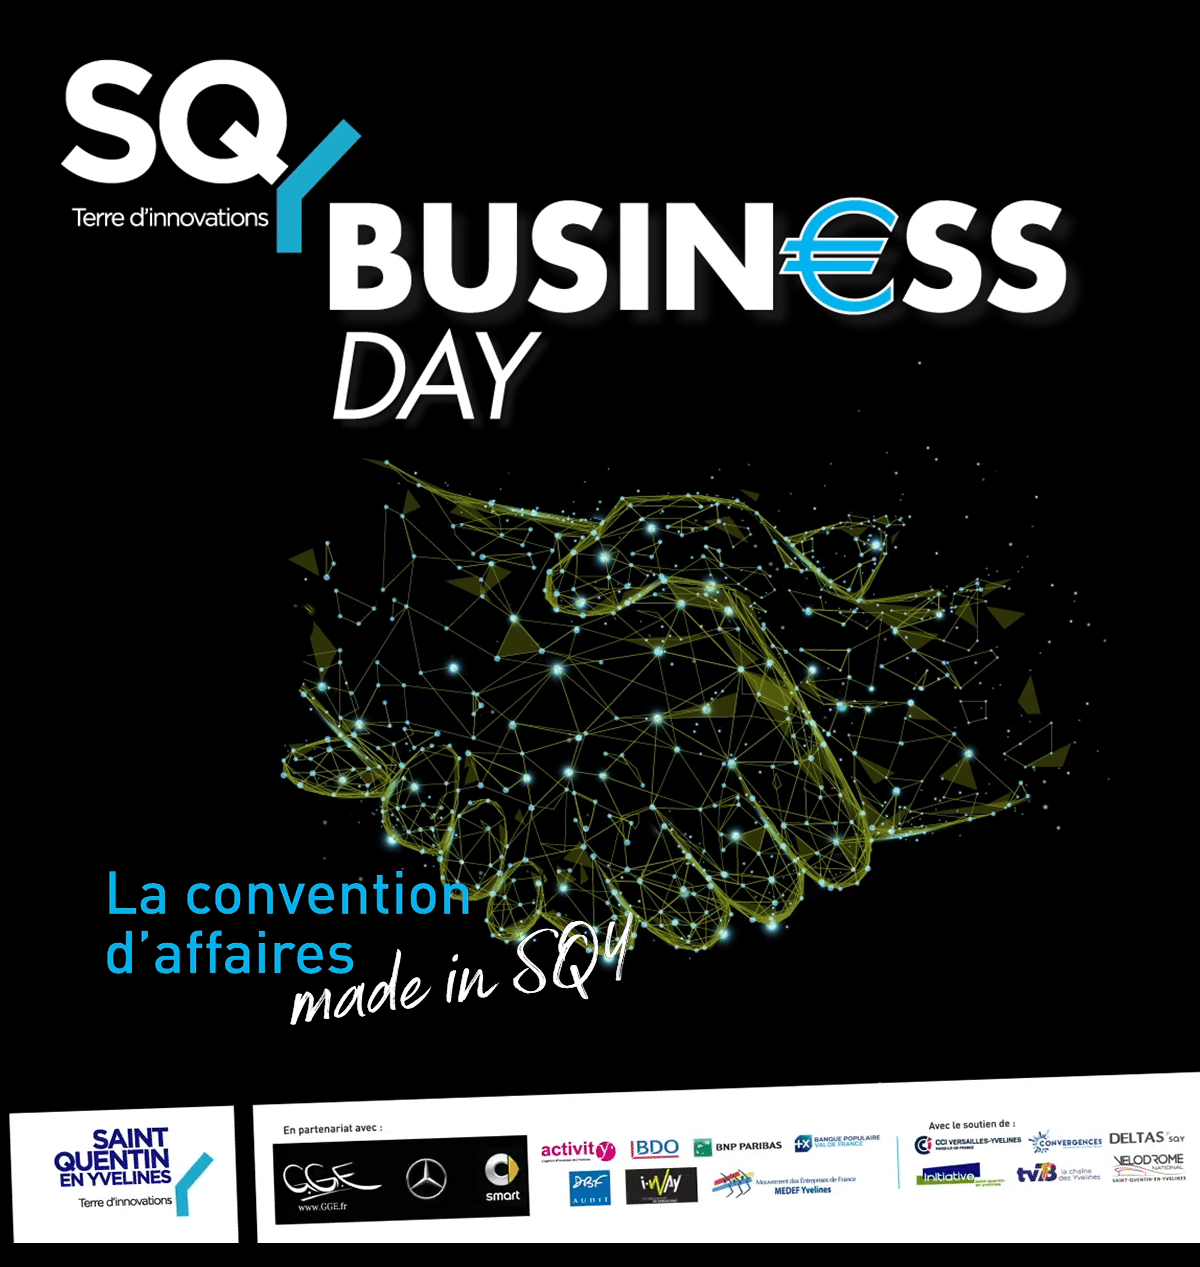 SQY Business Day, la convension d'affaires made in SQY